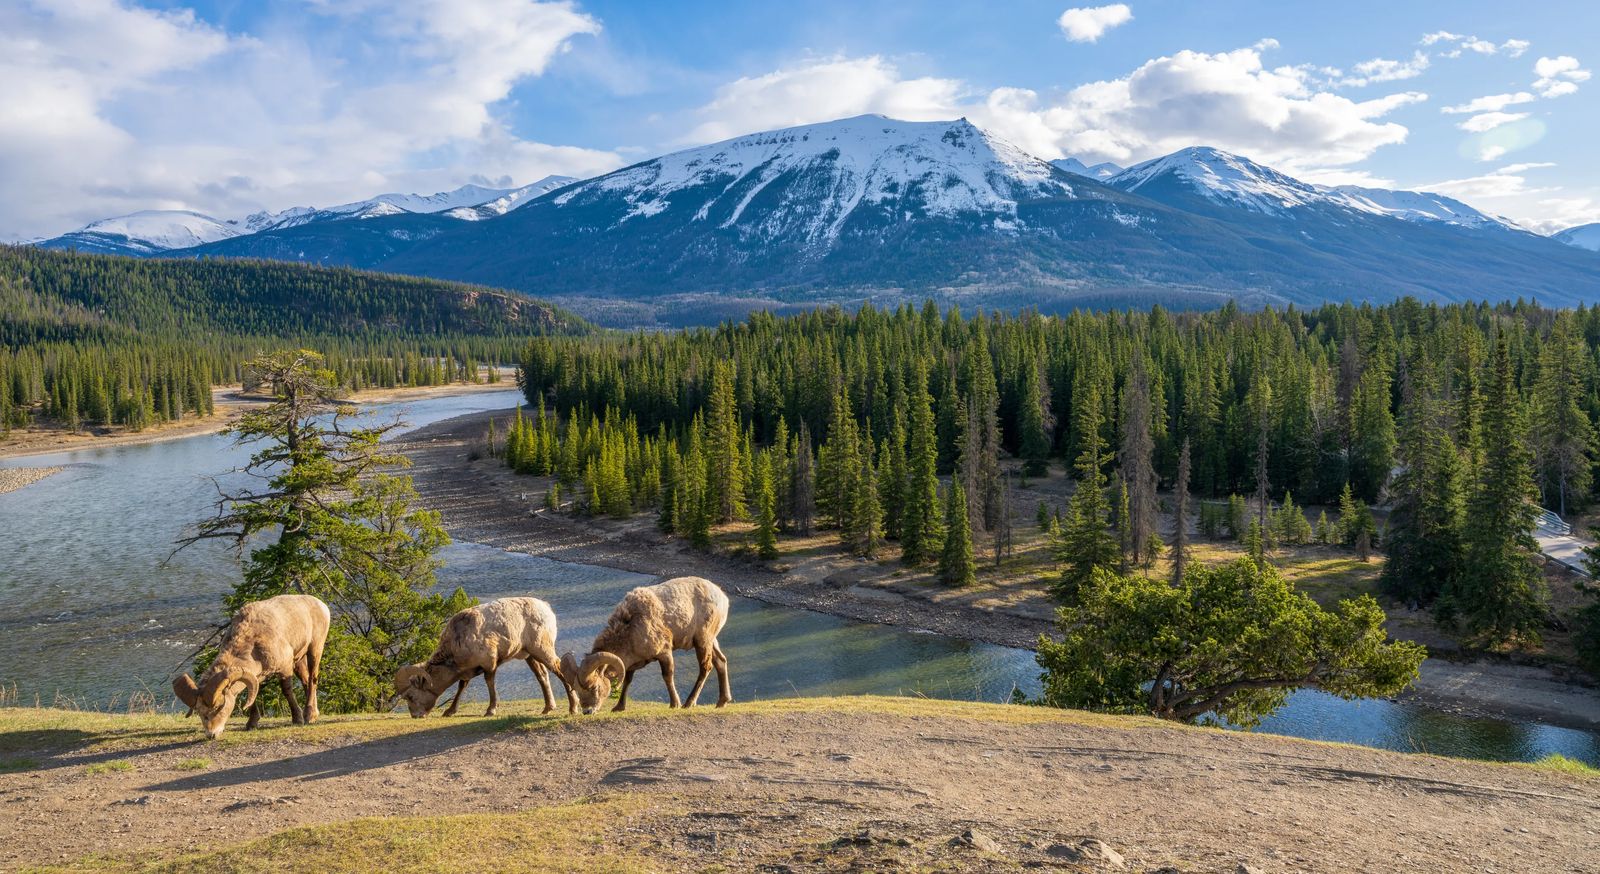 Jasper National Park with Big Horned sheep on a cliff above the Athabasca River